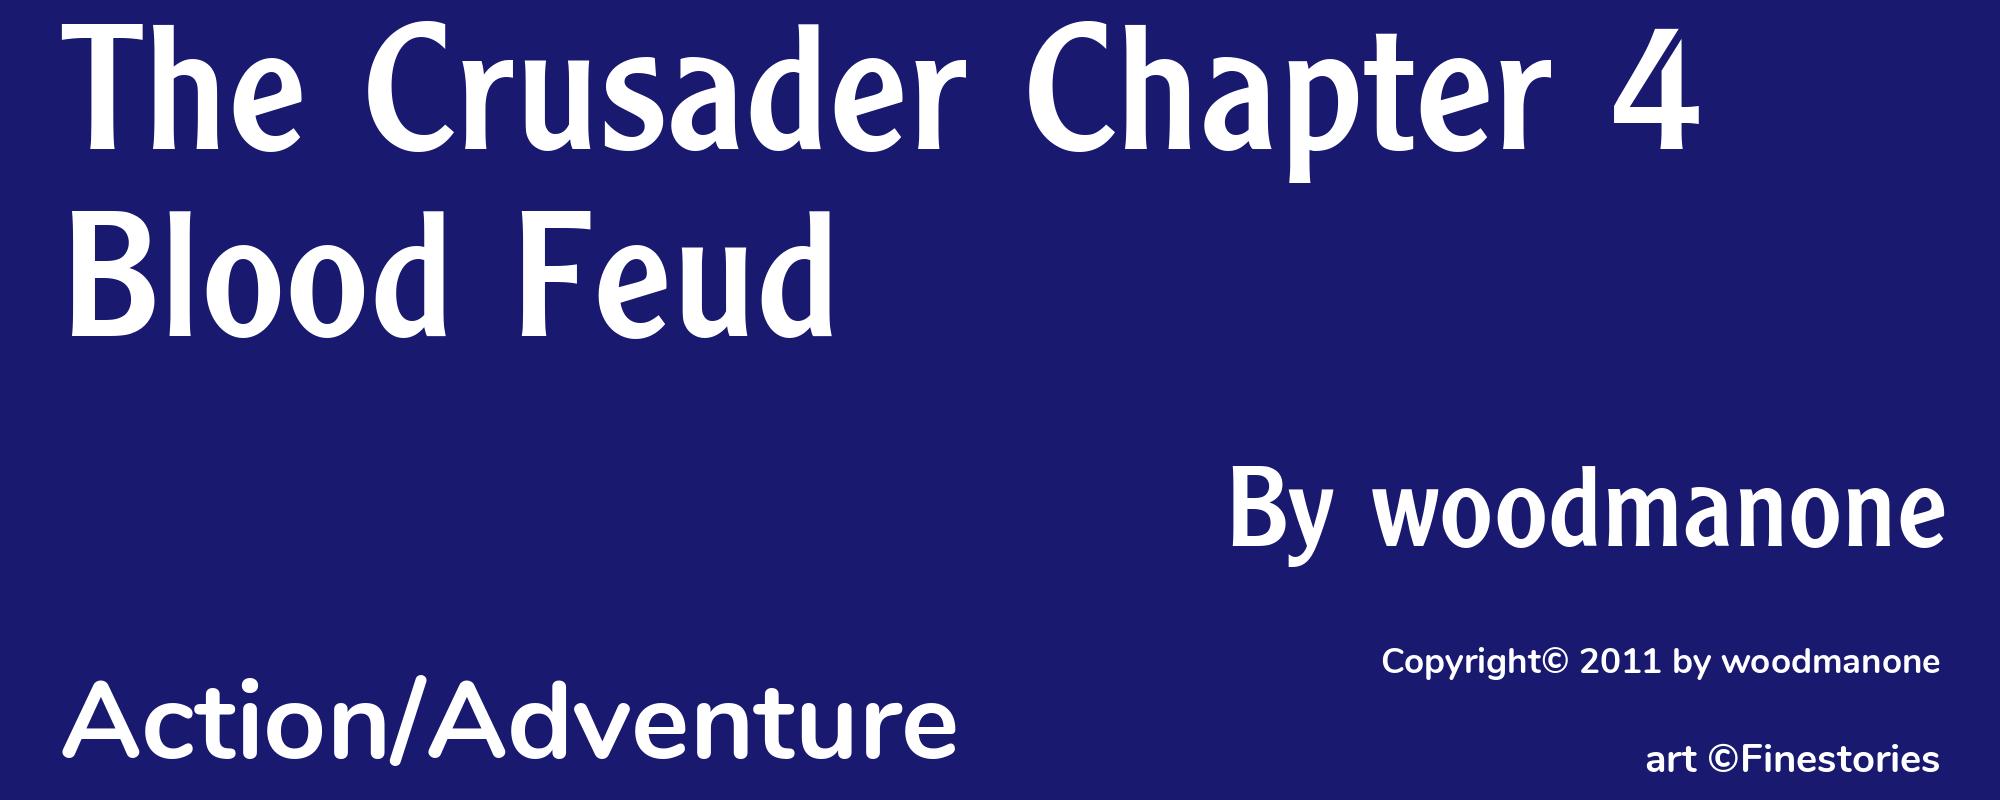 The Crusader Chapter 4 Blood Feud - Cover